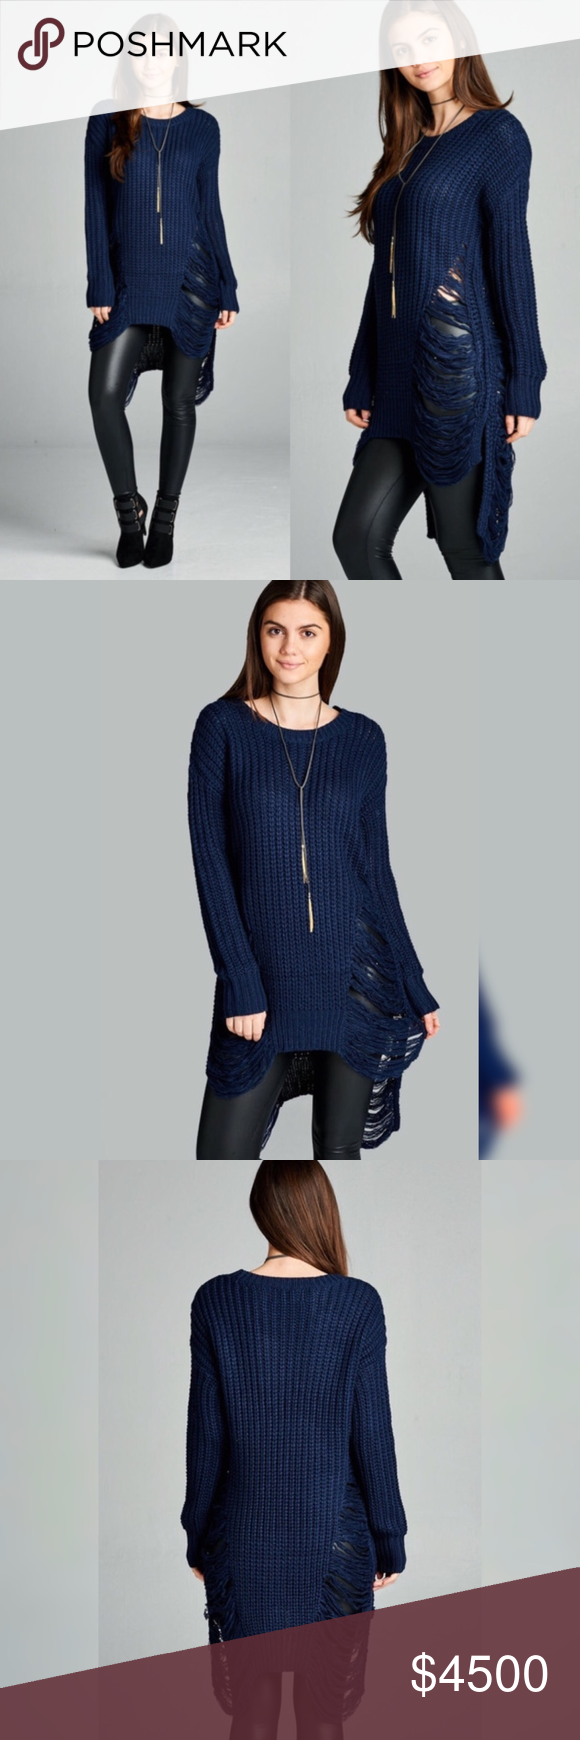 Navy Knit Frayed Long Tunic Sweater Coming ❣️Navy Knit Frayed Long Tunic Swe…